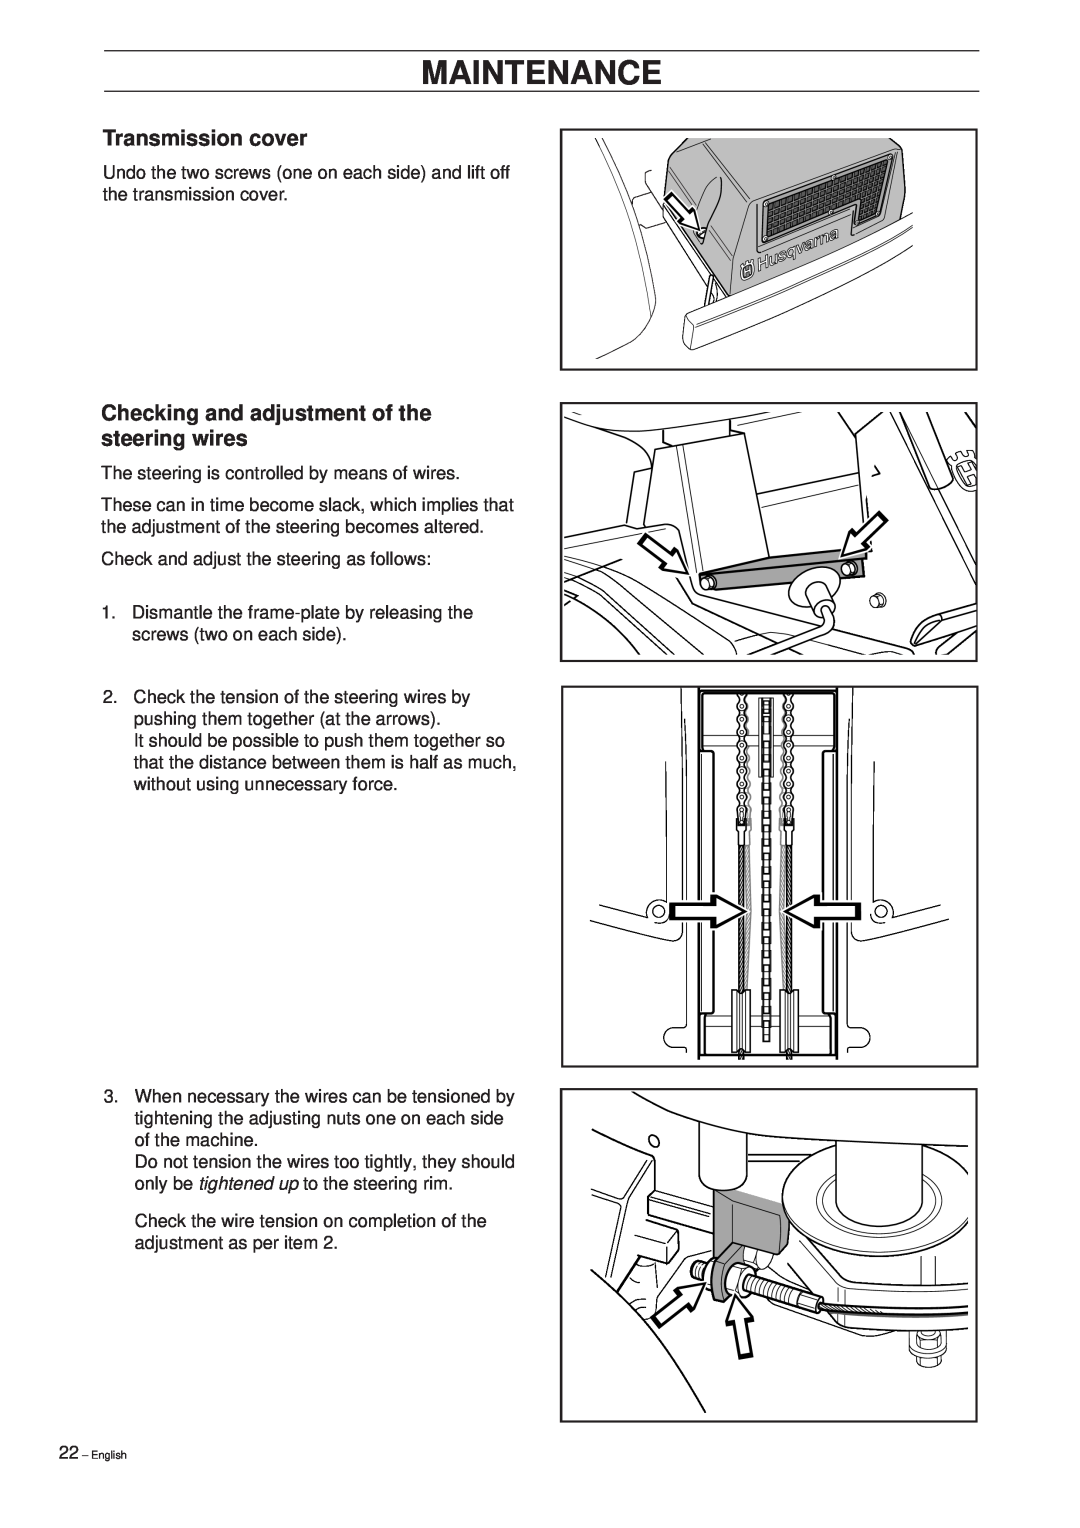 Husqvarna Pro 15 manual Transmission cover, Checking and adjustment of the steering wires, Maintenance 